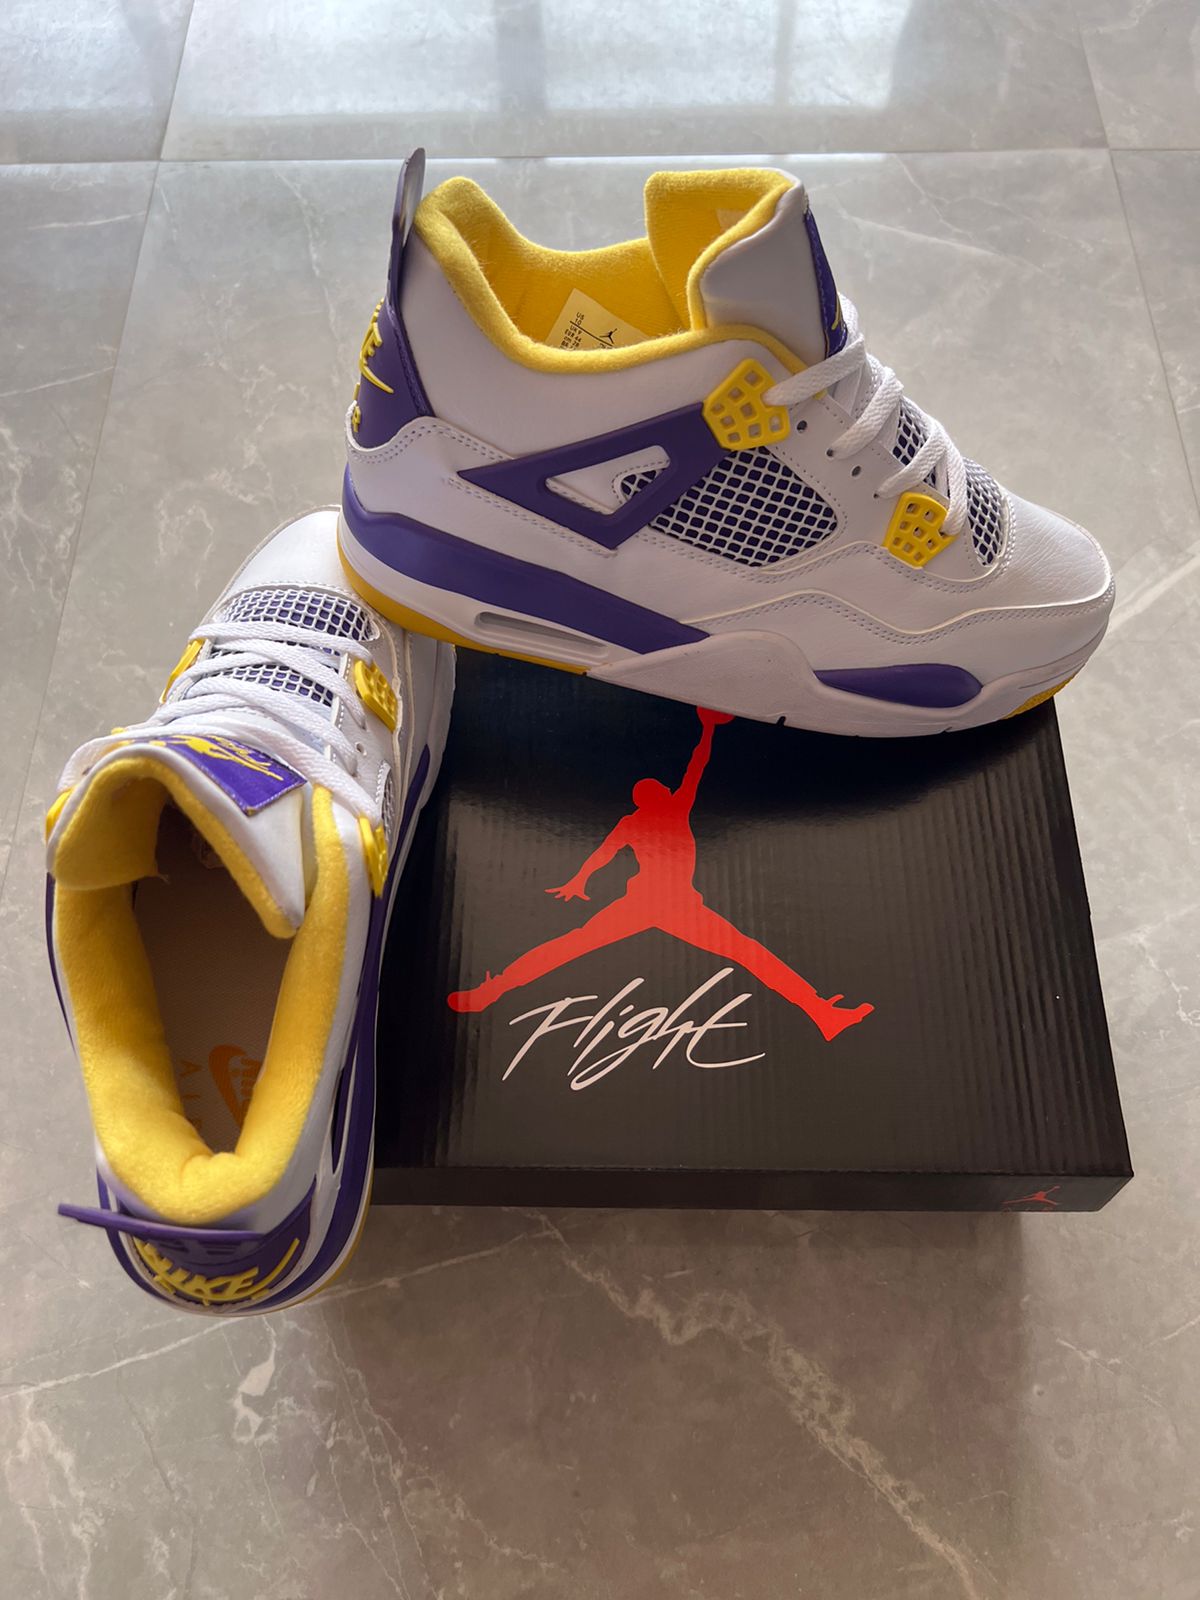 Imported Retro Lakers Home Sneakers In Stock